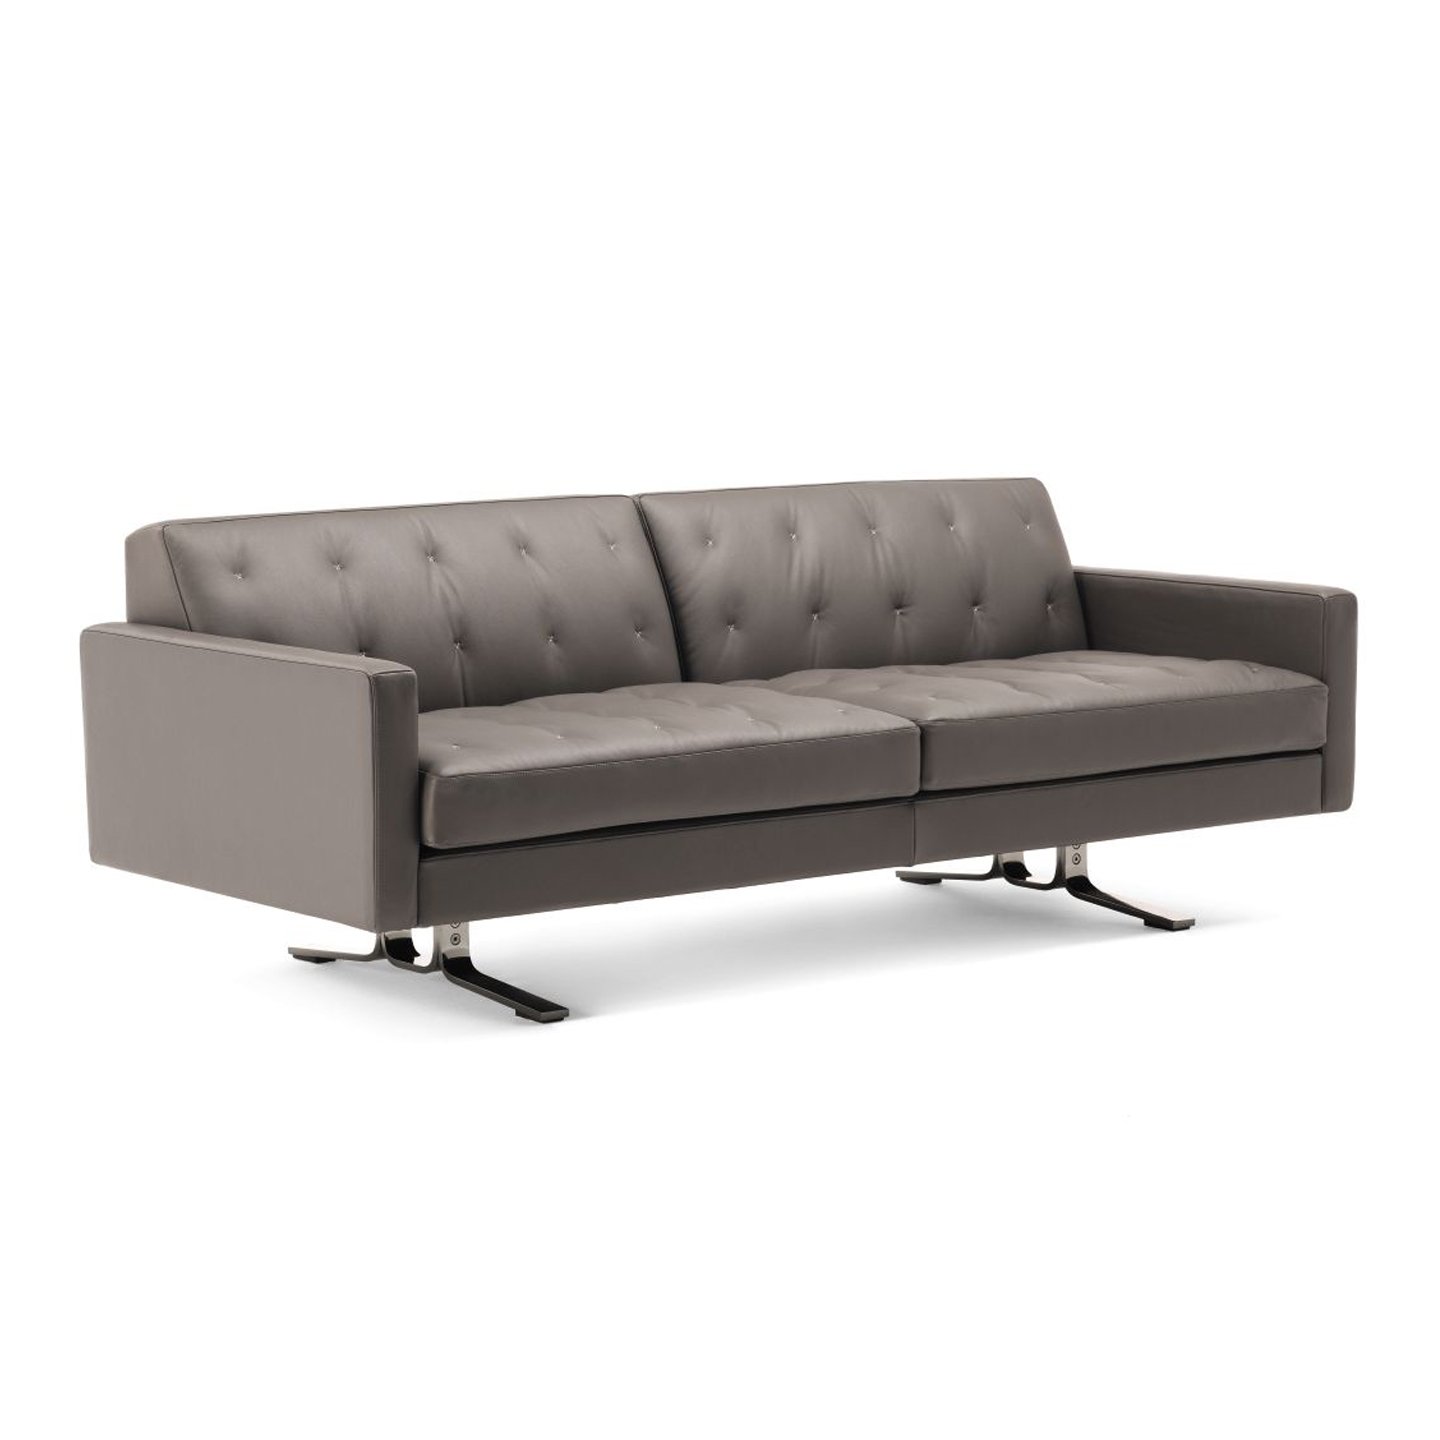 Haworth two seater Kennnedee Jr lounge sofa in brown leather side angle